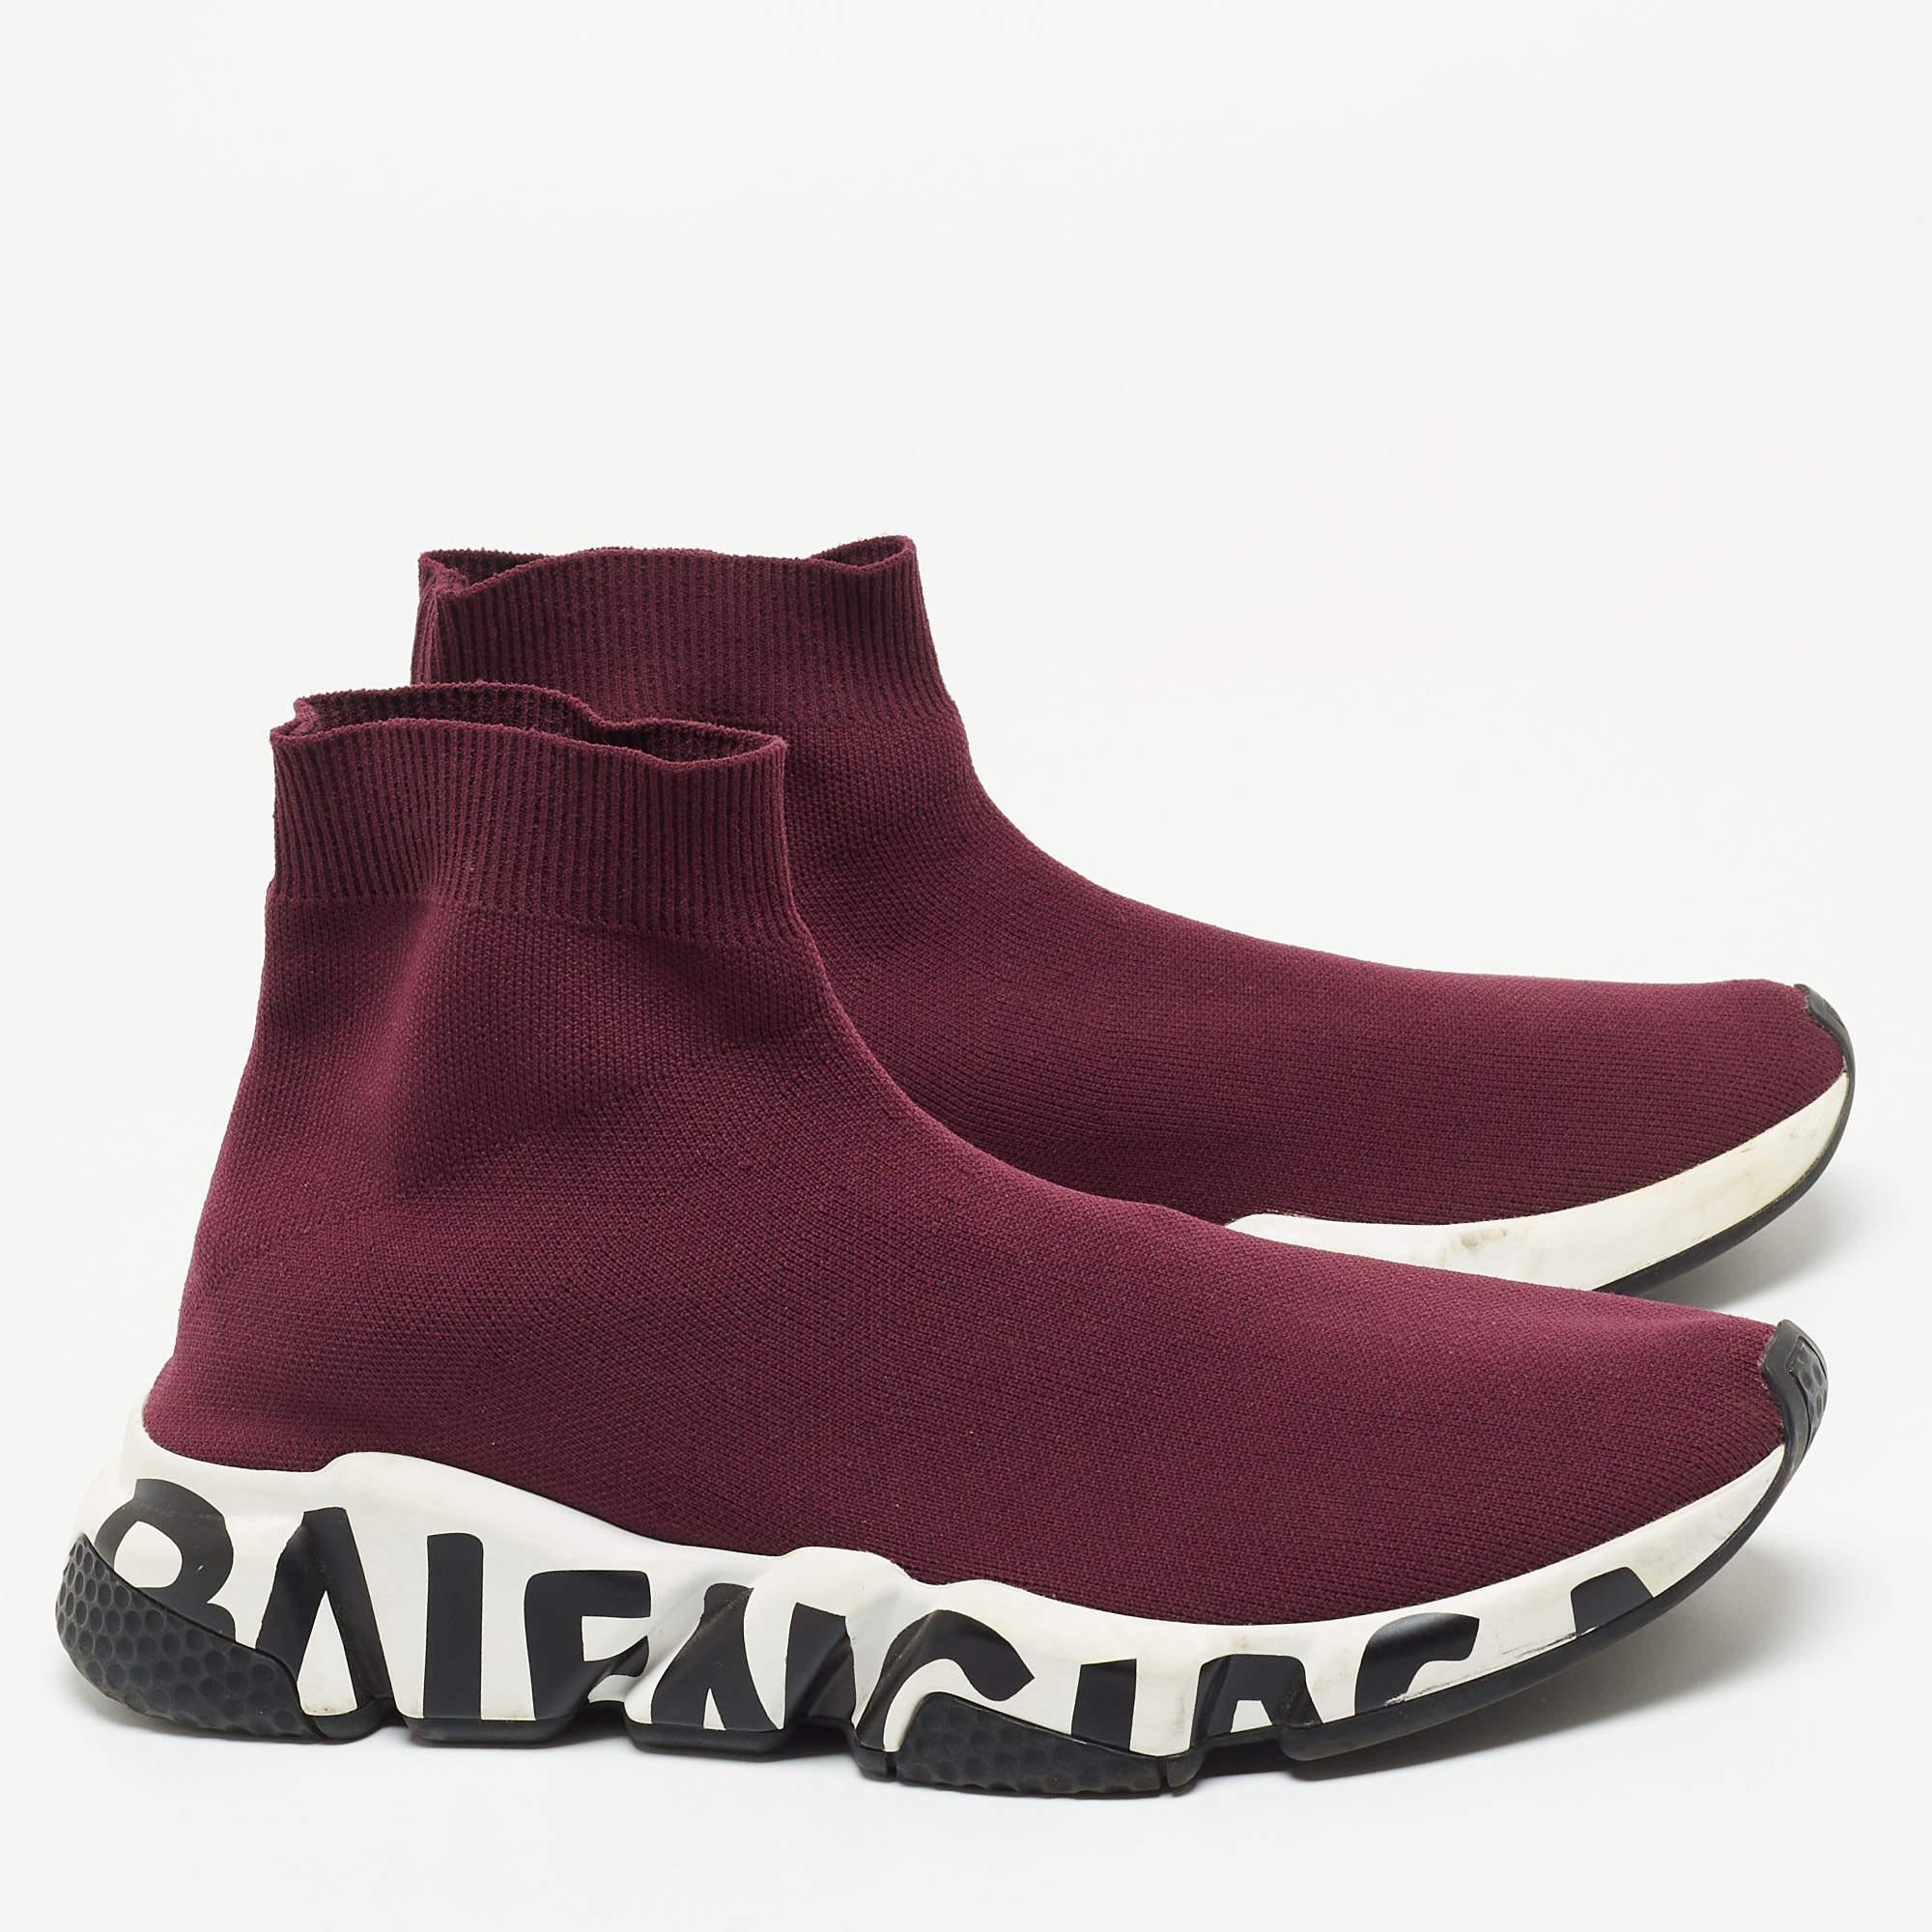 Balenciaga Purple Knit Speed Trainer High Top Sneakers Size 40 For Sale 2